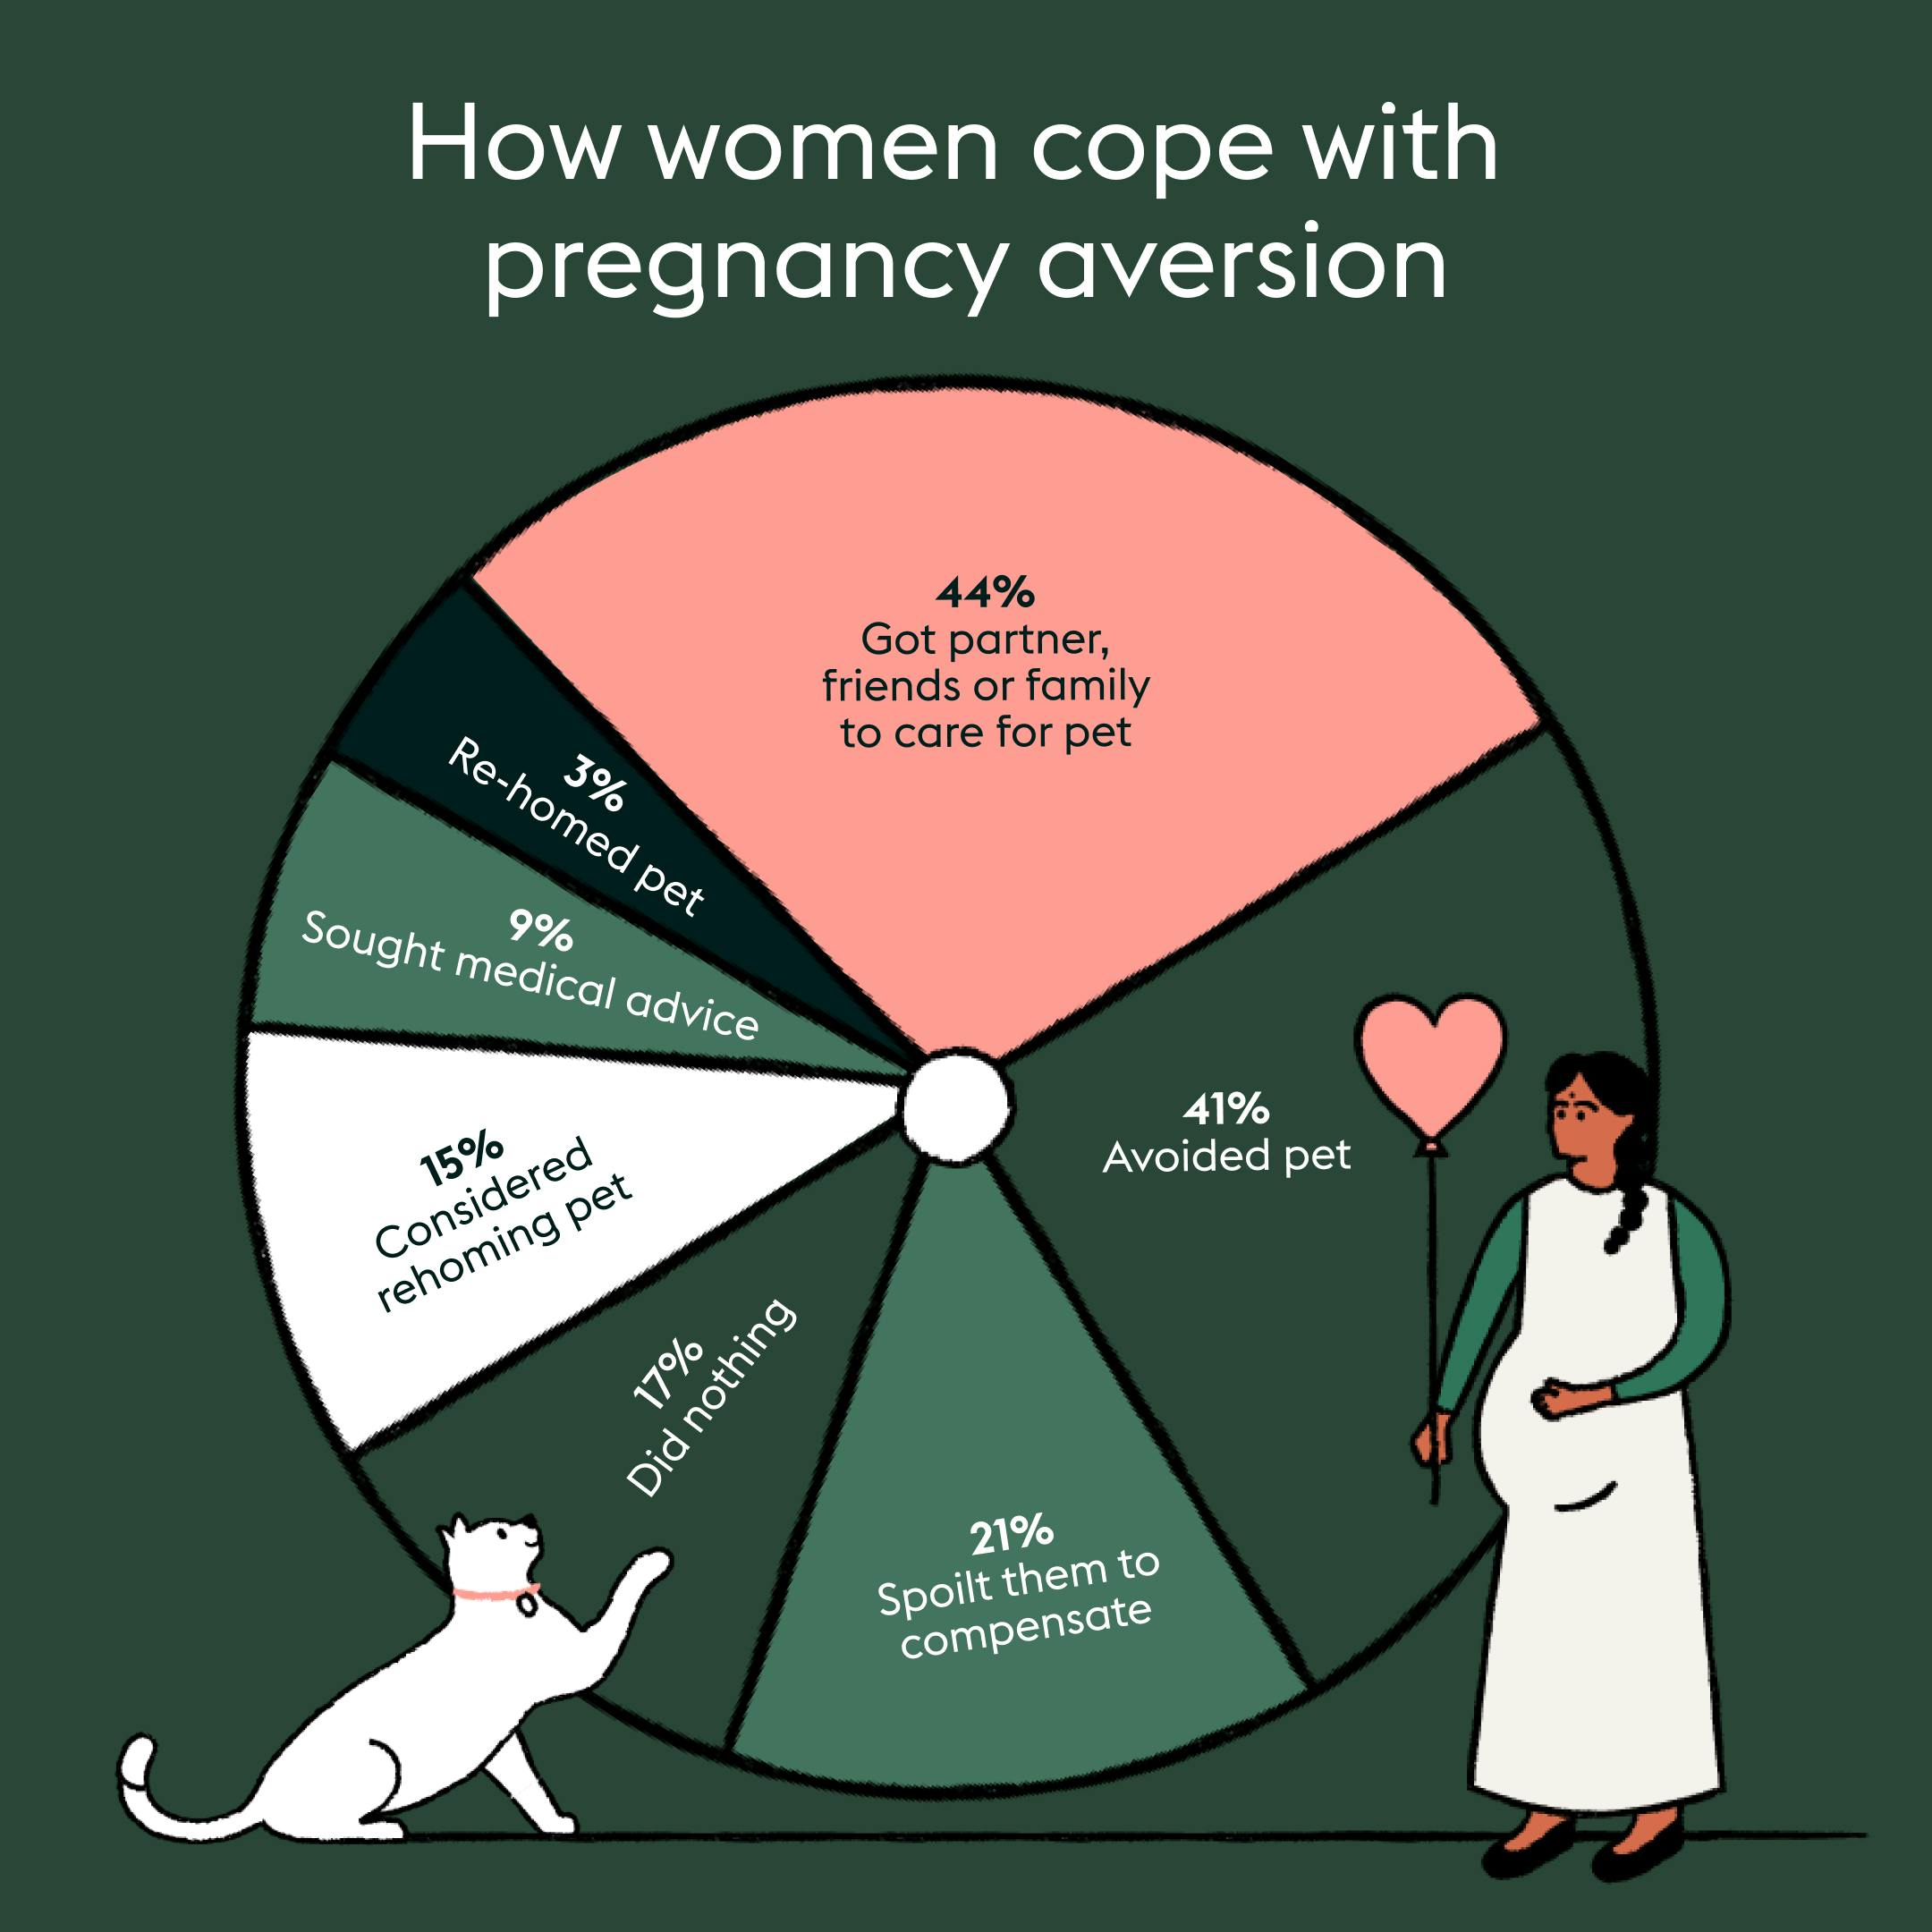 How pregnant women cope with pet aversion